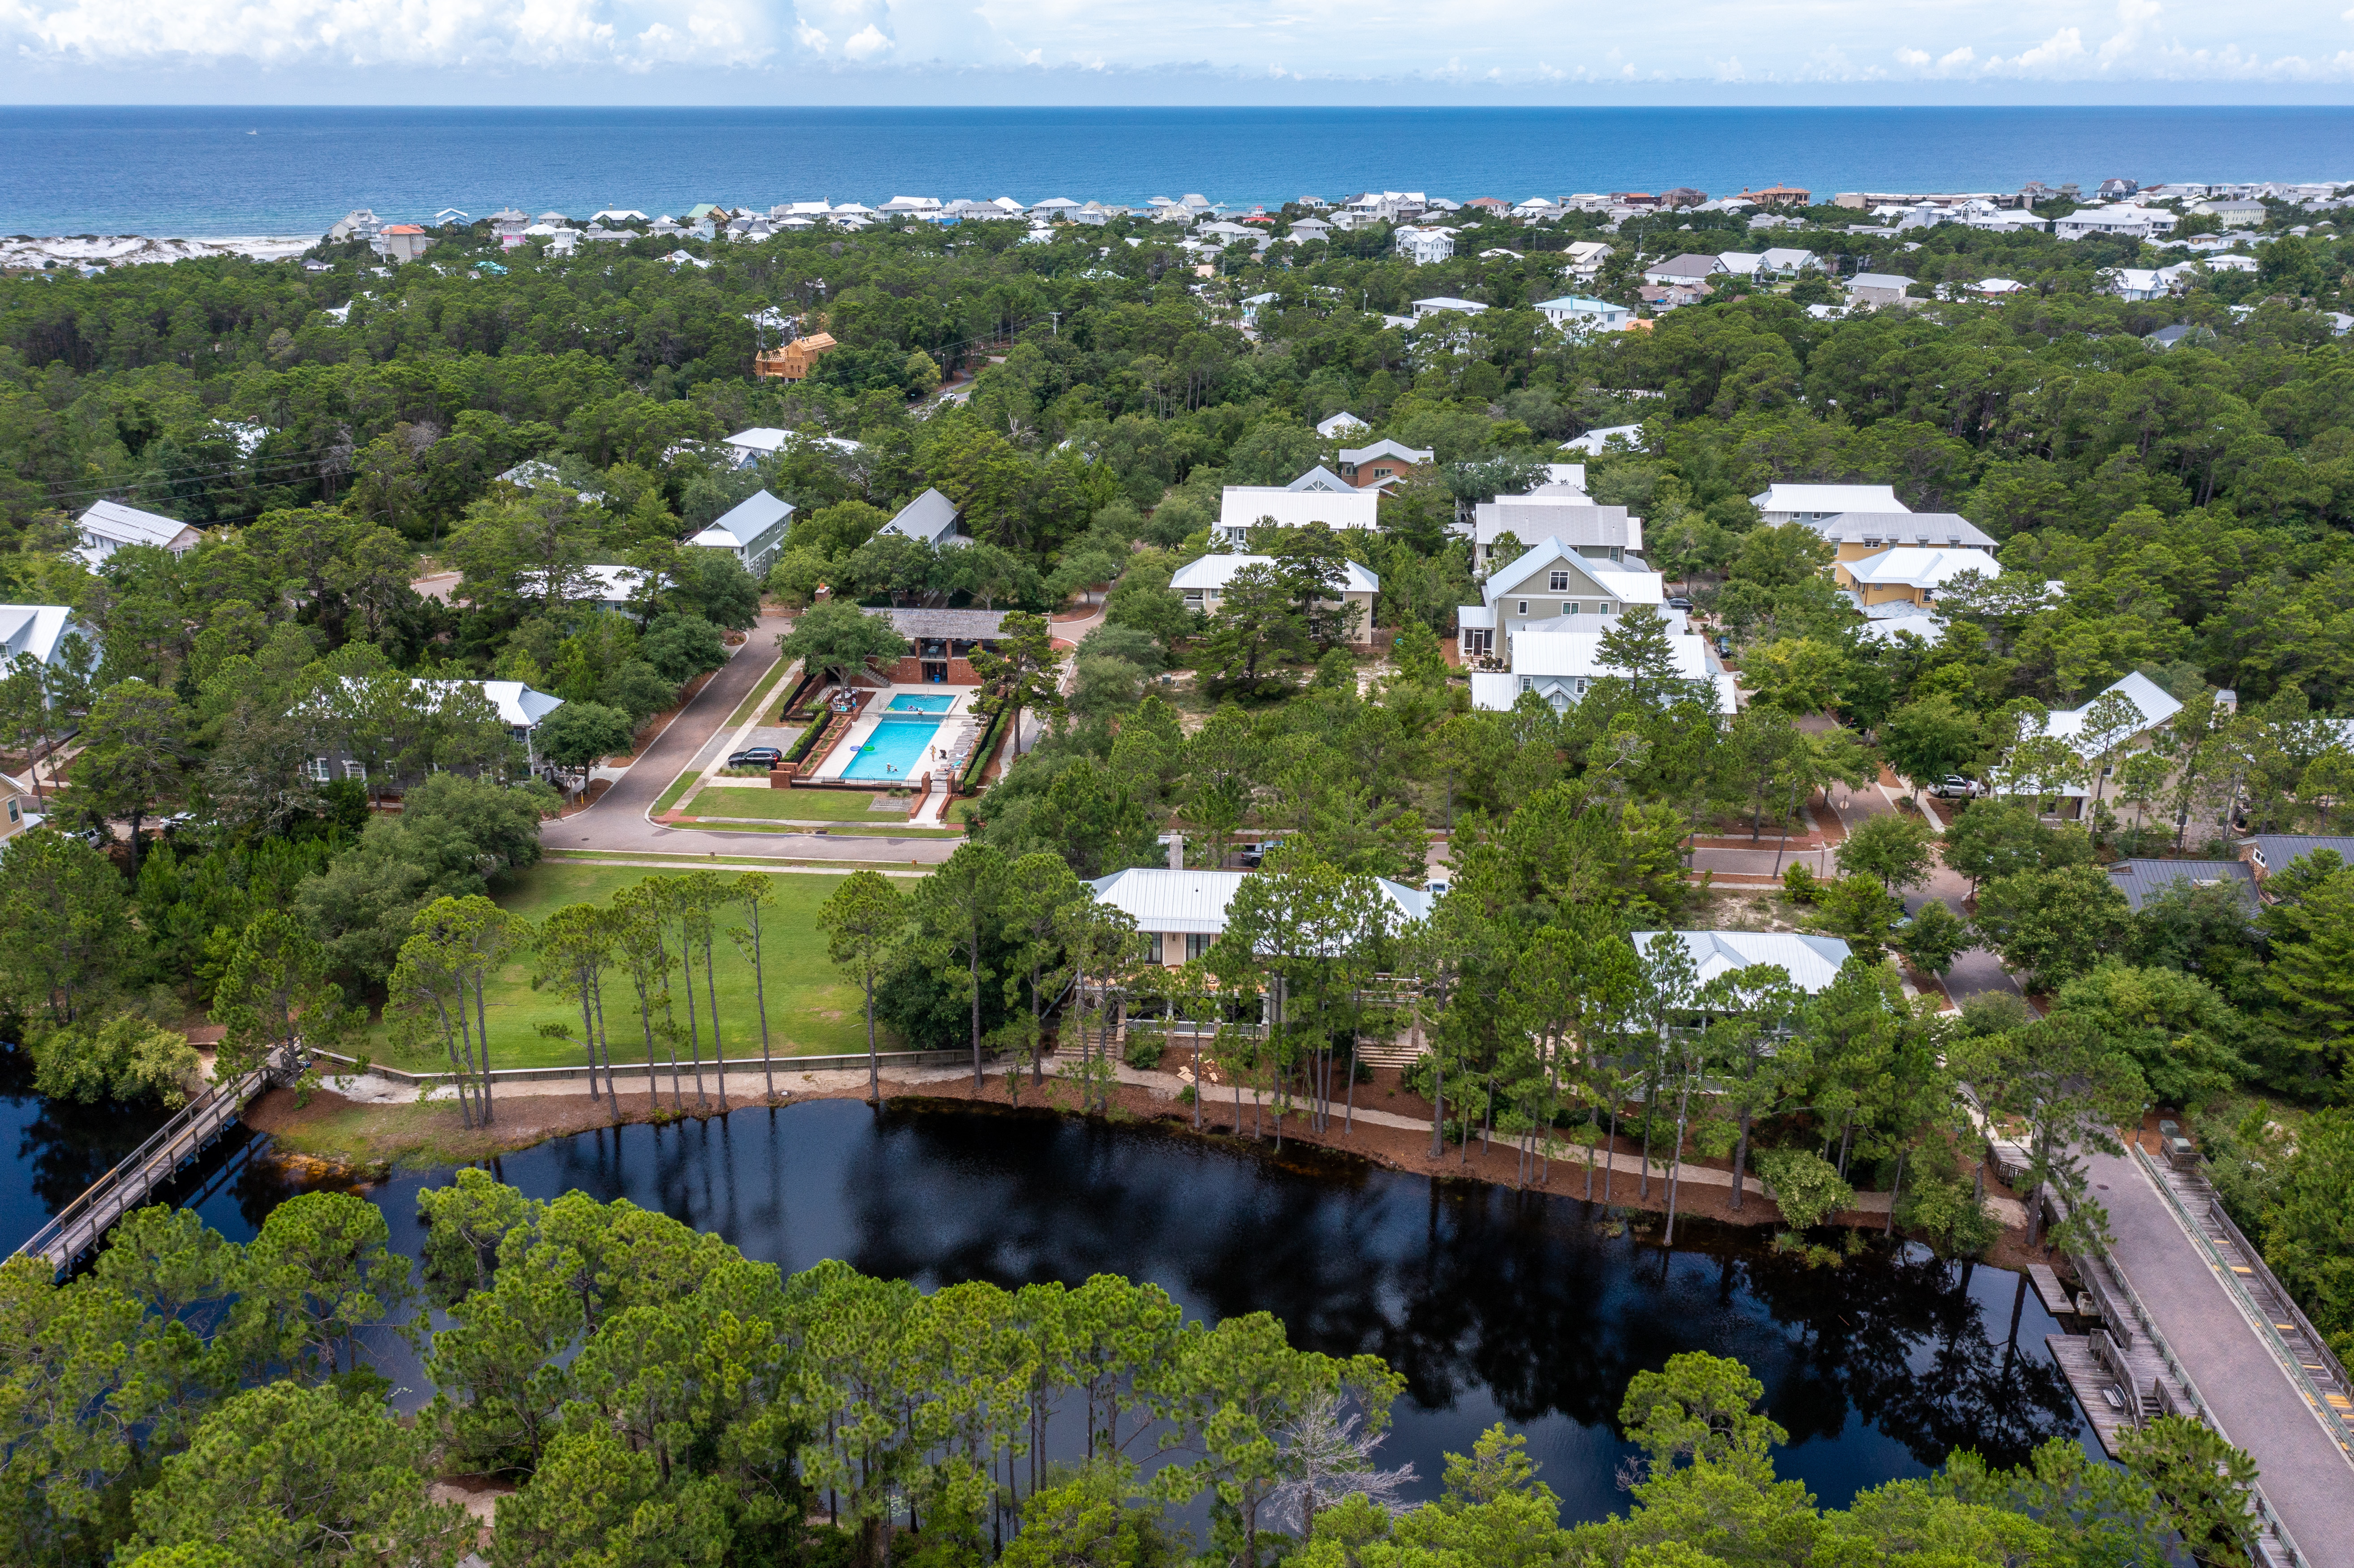 An aerial view of the Forest Lakes community featuring the lake, community pool and the Gulf